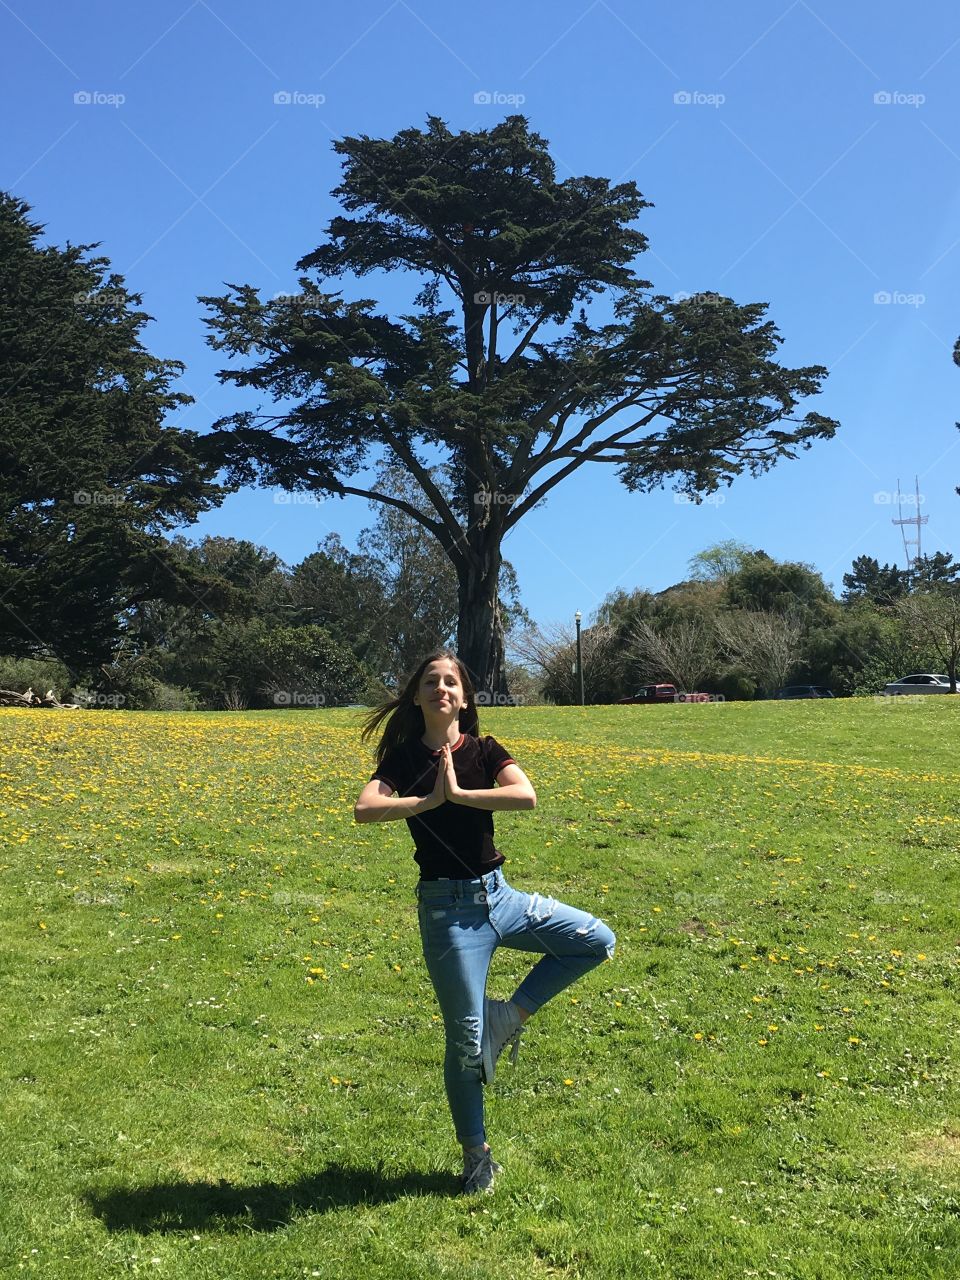 Tree pose in front of tree